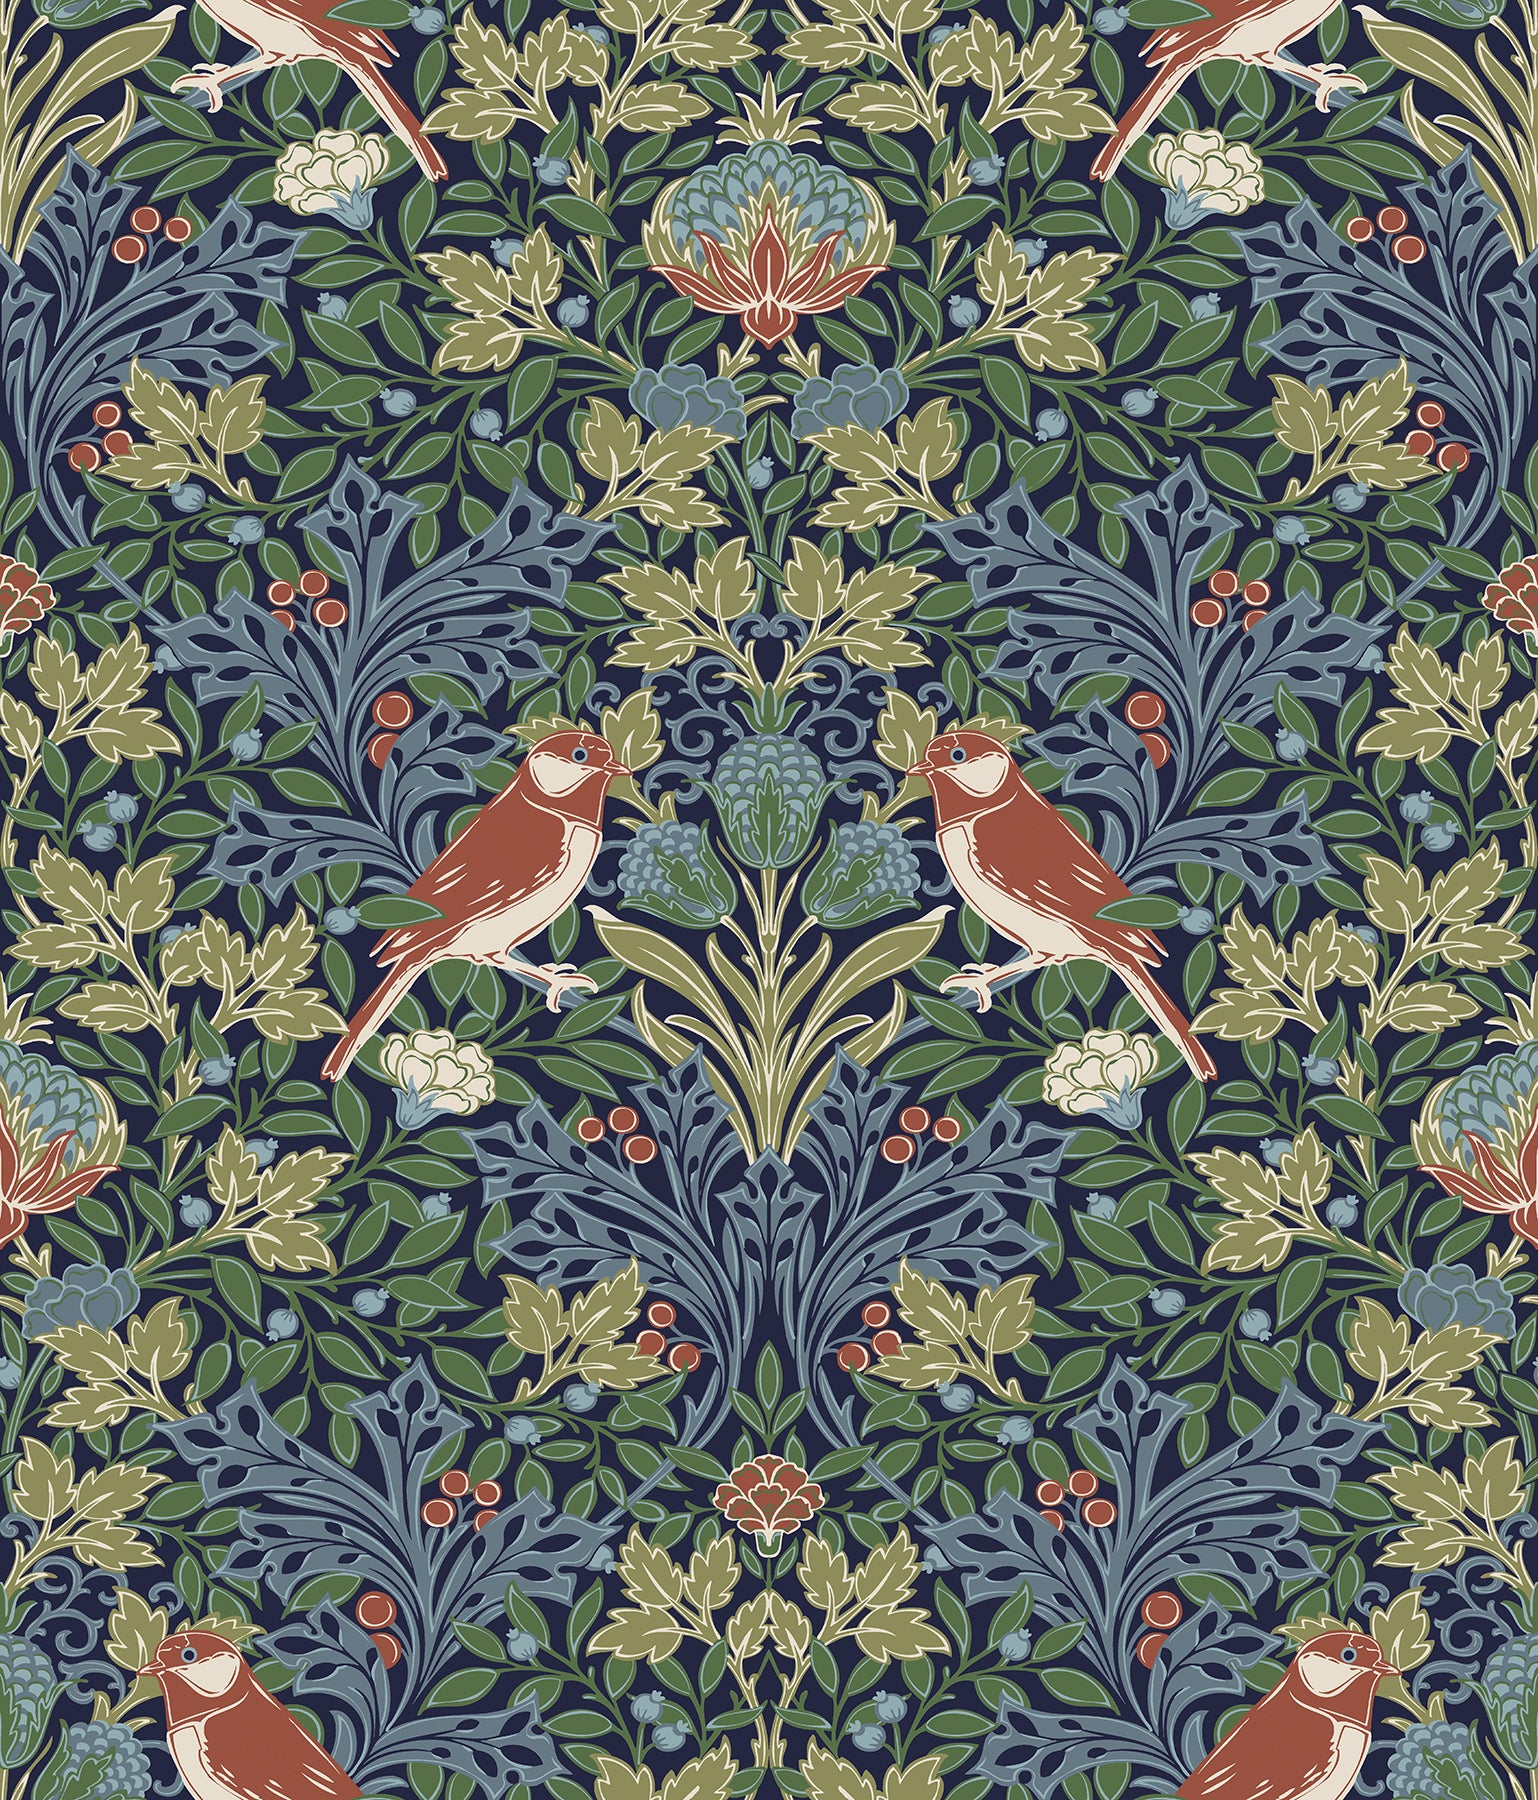 Garden Aviary Peel and Stick Wallpaper Peel and Stick Wallpaper RoomMates Roll Jewel 